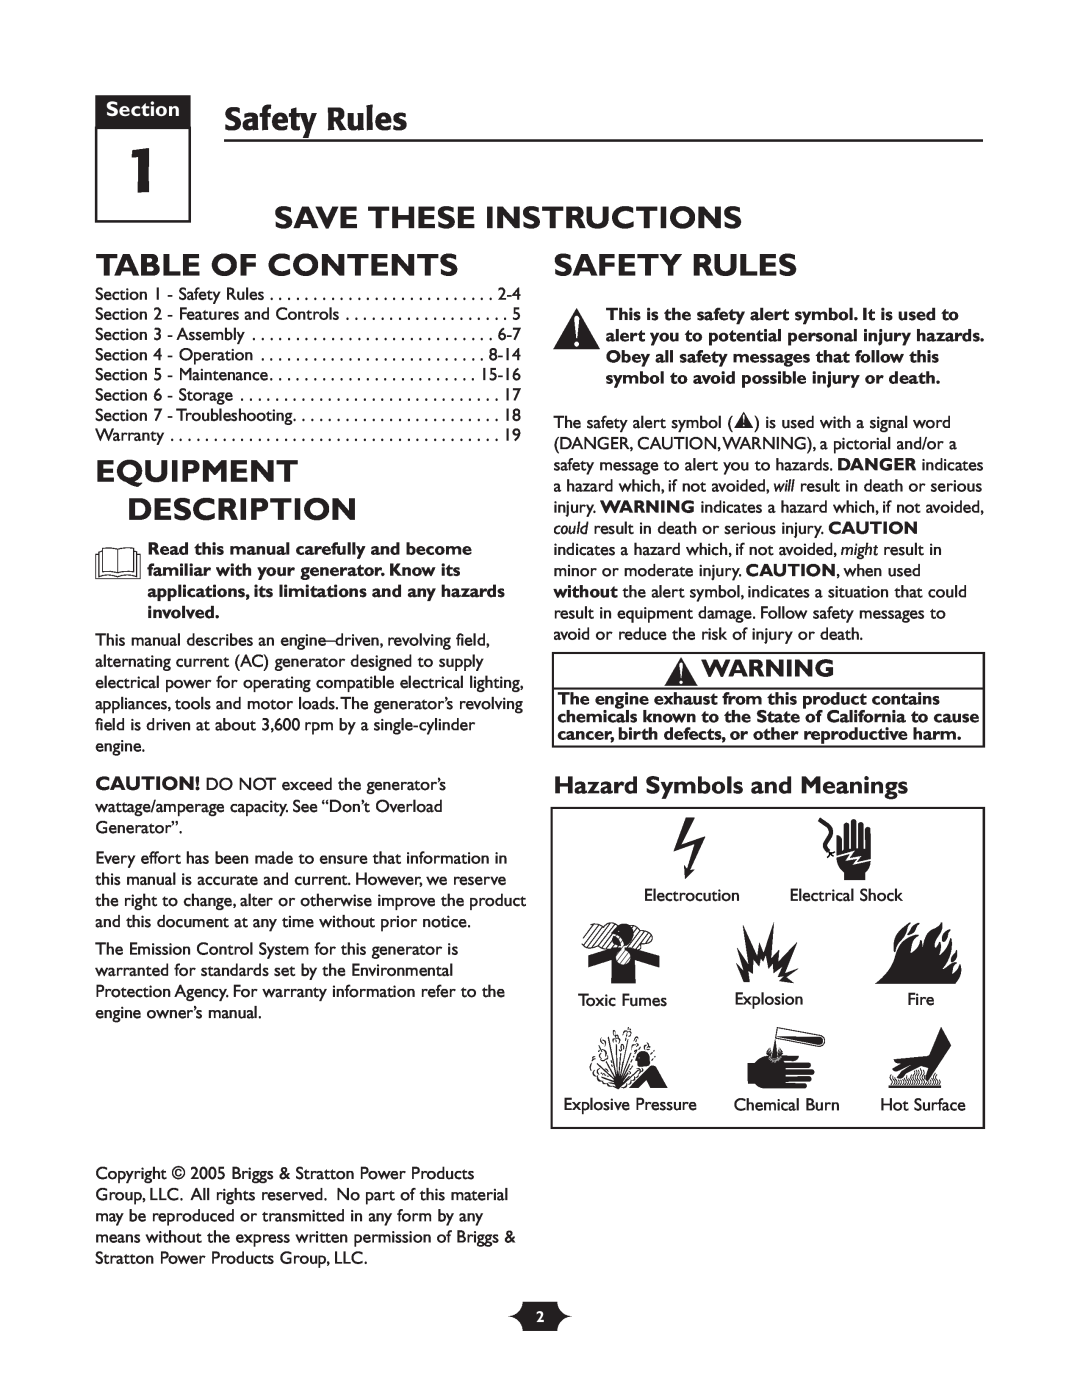 Briggs & Stratton 30237 Safety Rules, Save These Instructions, Table Of Contents, Equipment Description, Section 